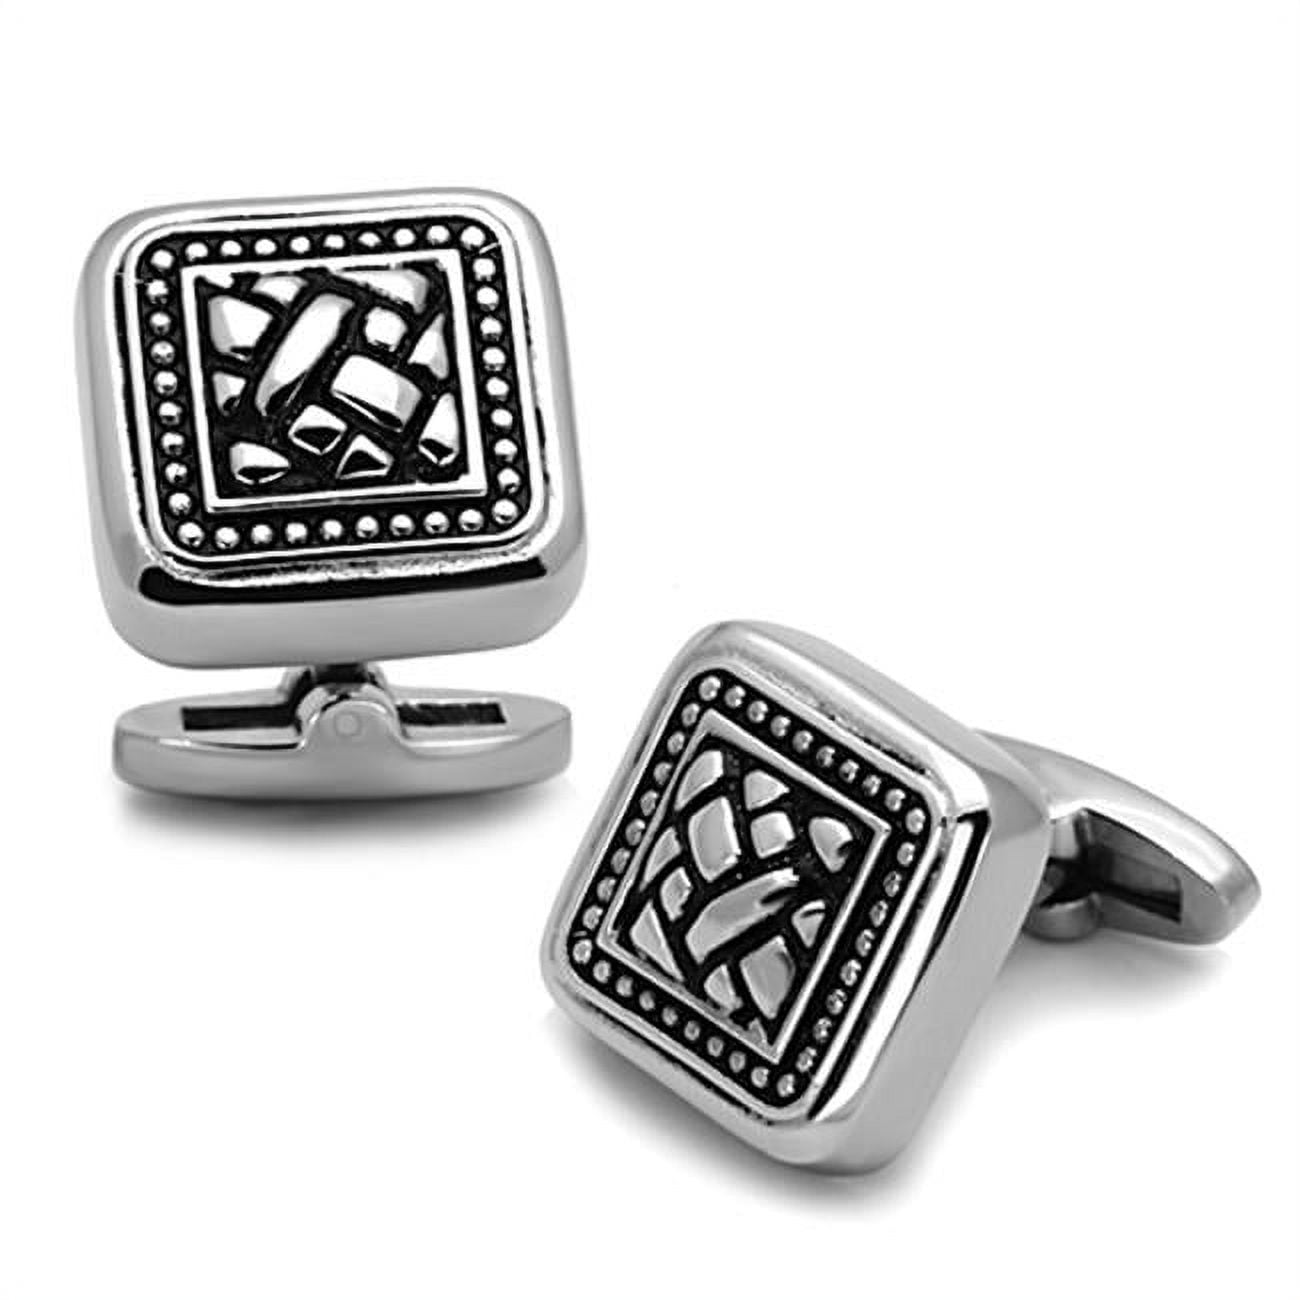 Picture of Alamode TK1256 Men High Polished Stainless Steel Cufflink with Epoxy in Jet